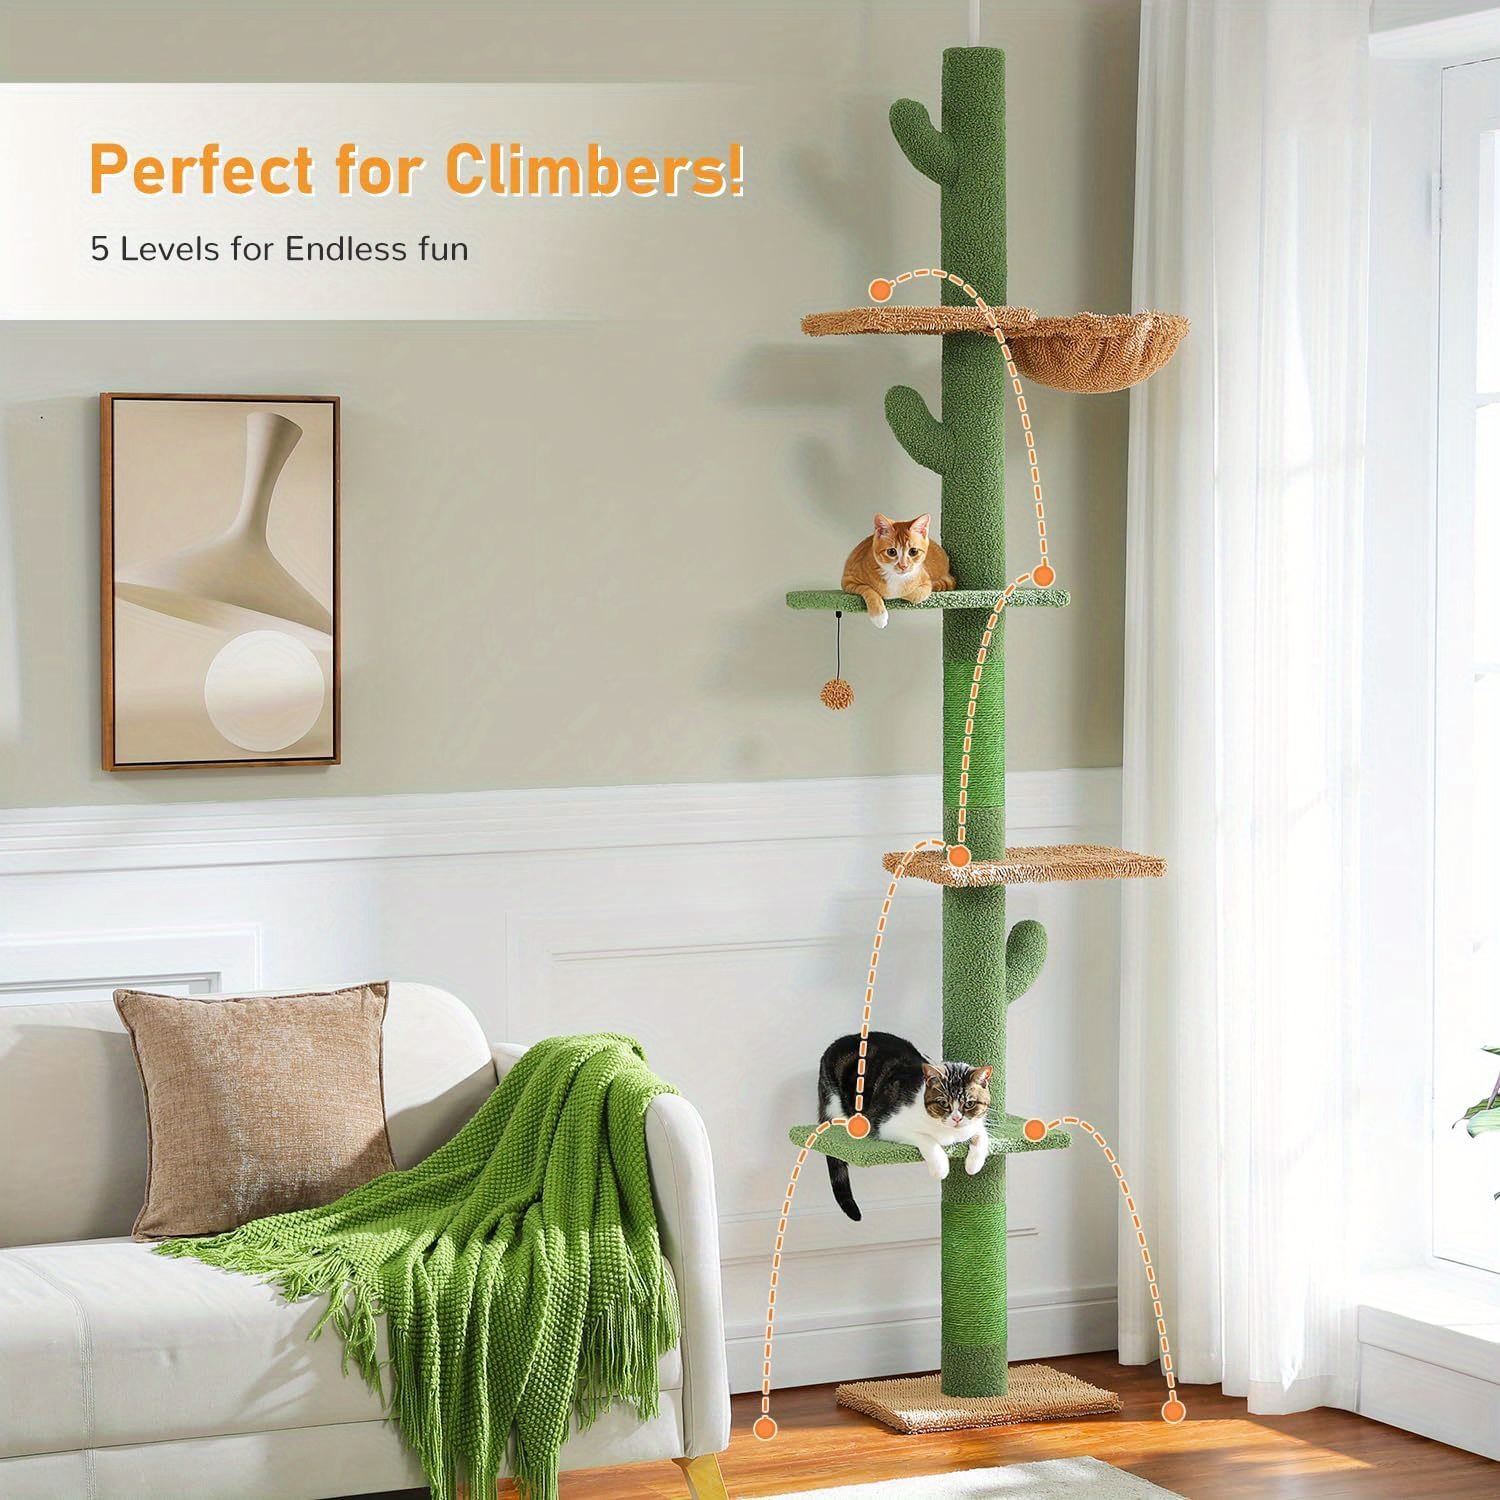 

Cactus Floor To Ceiling Cat Tower With Adjustable Height (95-108 Inches), 5 Level Cat Climbing Tower With Cozy Hammock, Platforms And Dangling Balls For Indoor Cats